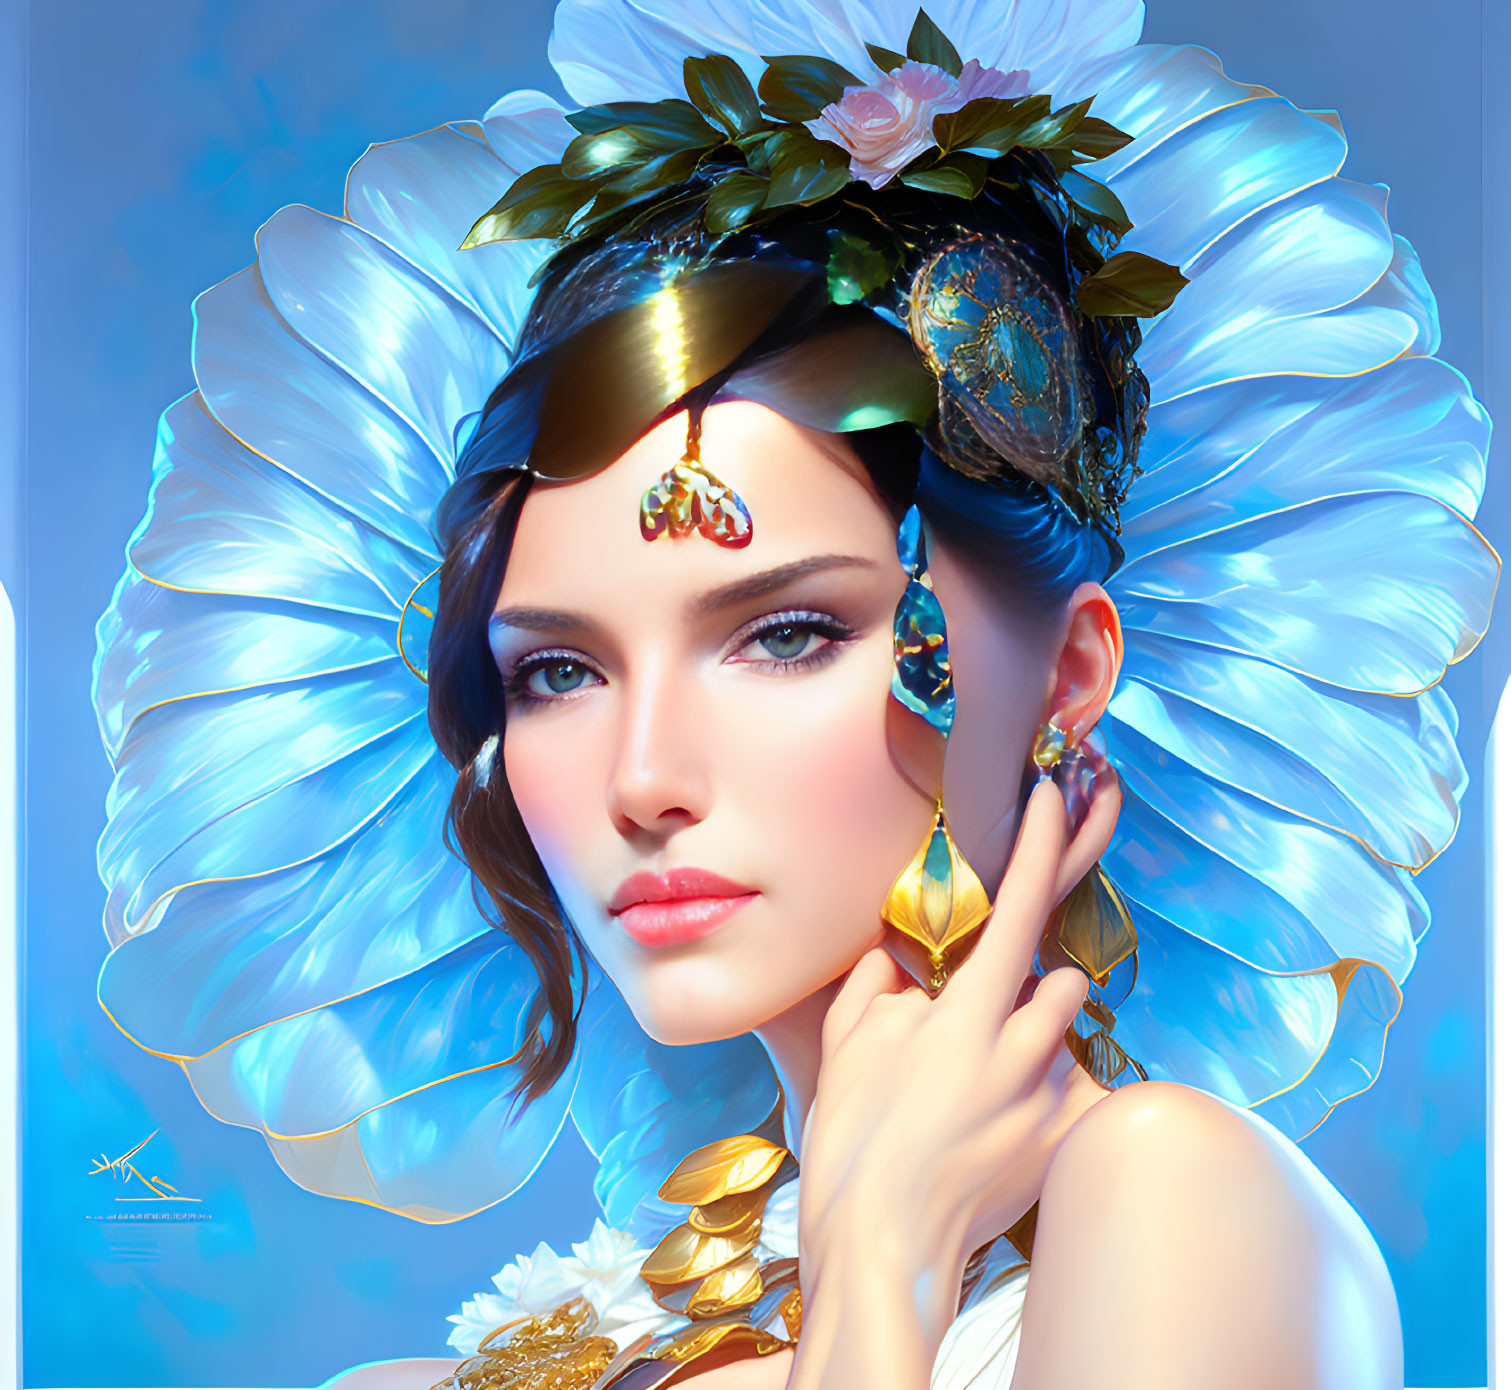 Digital art portrait of a woman with ornate headpiece: blue petals, gold adornments, white